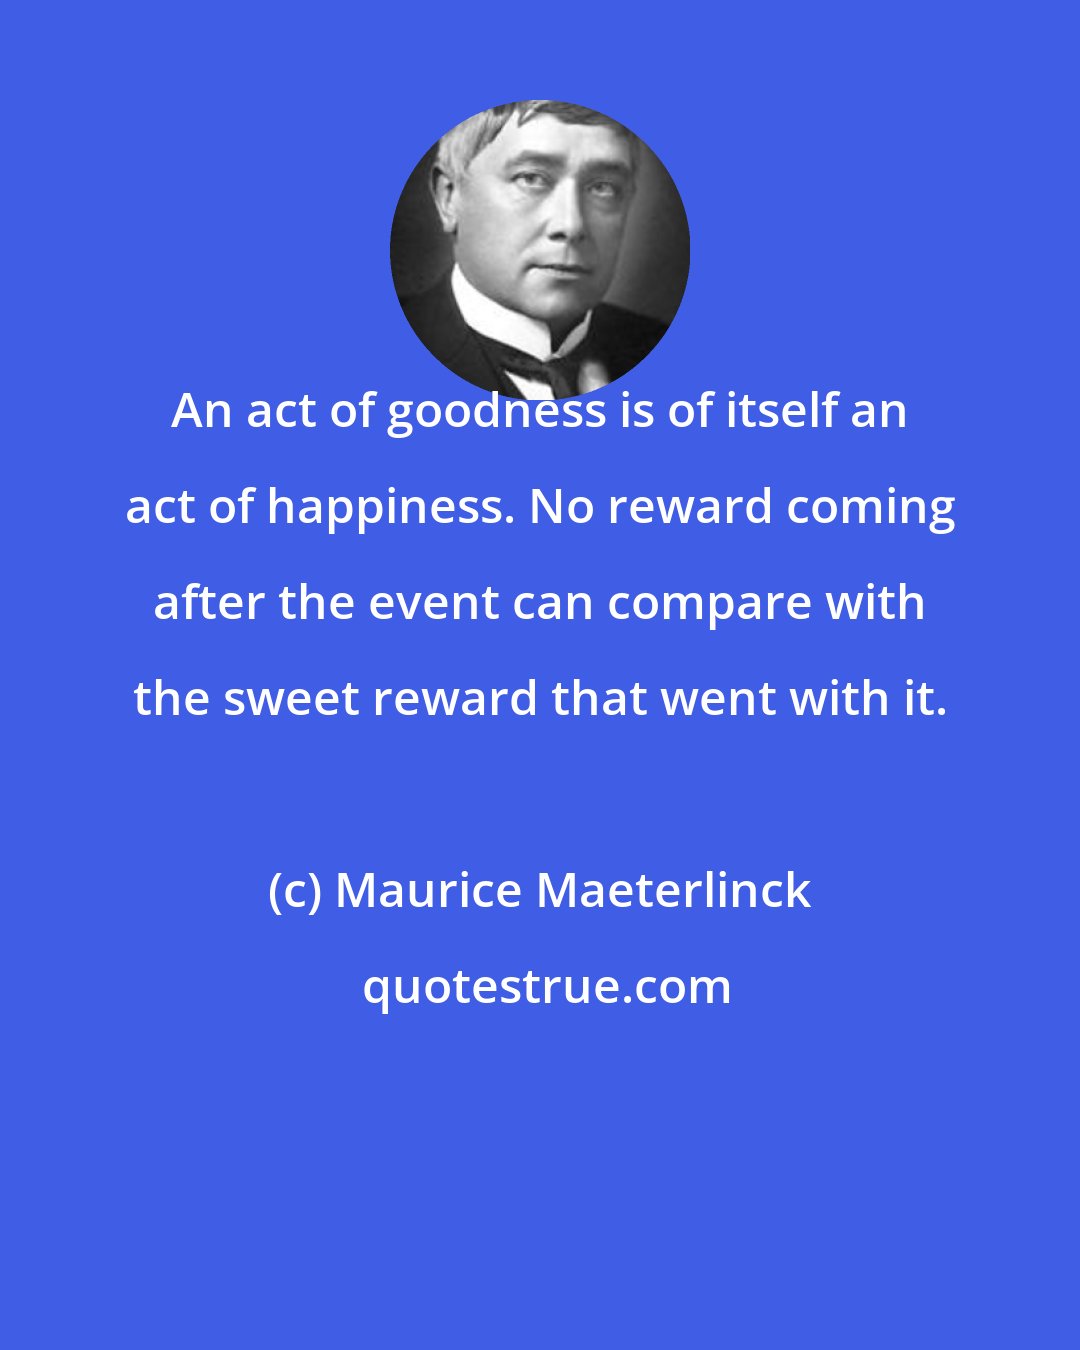 Maurice Maeterlinck: An act of goodness is of itself an act of happiness. No reward coming after the event can compare with the sweet reward that went with it.